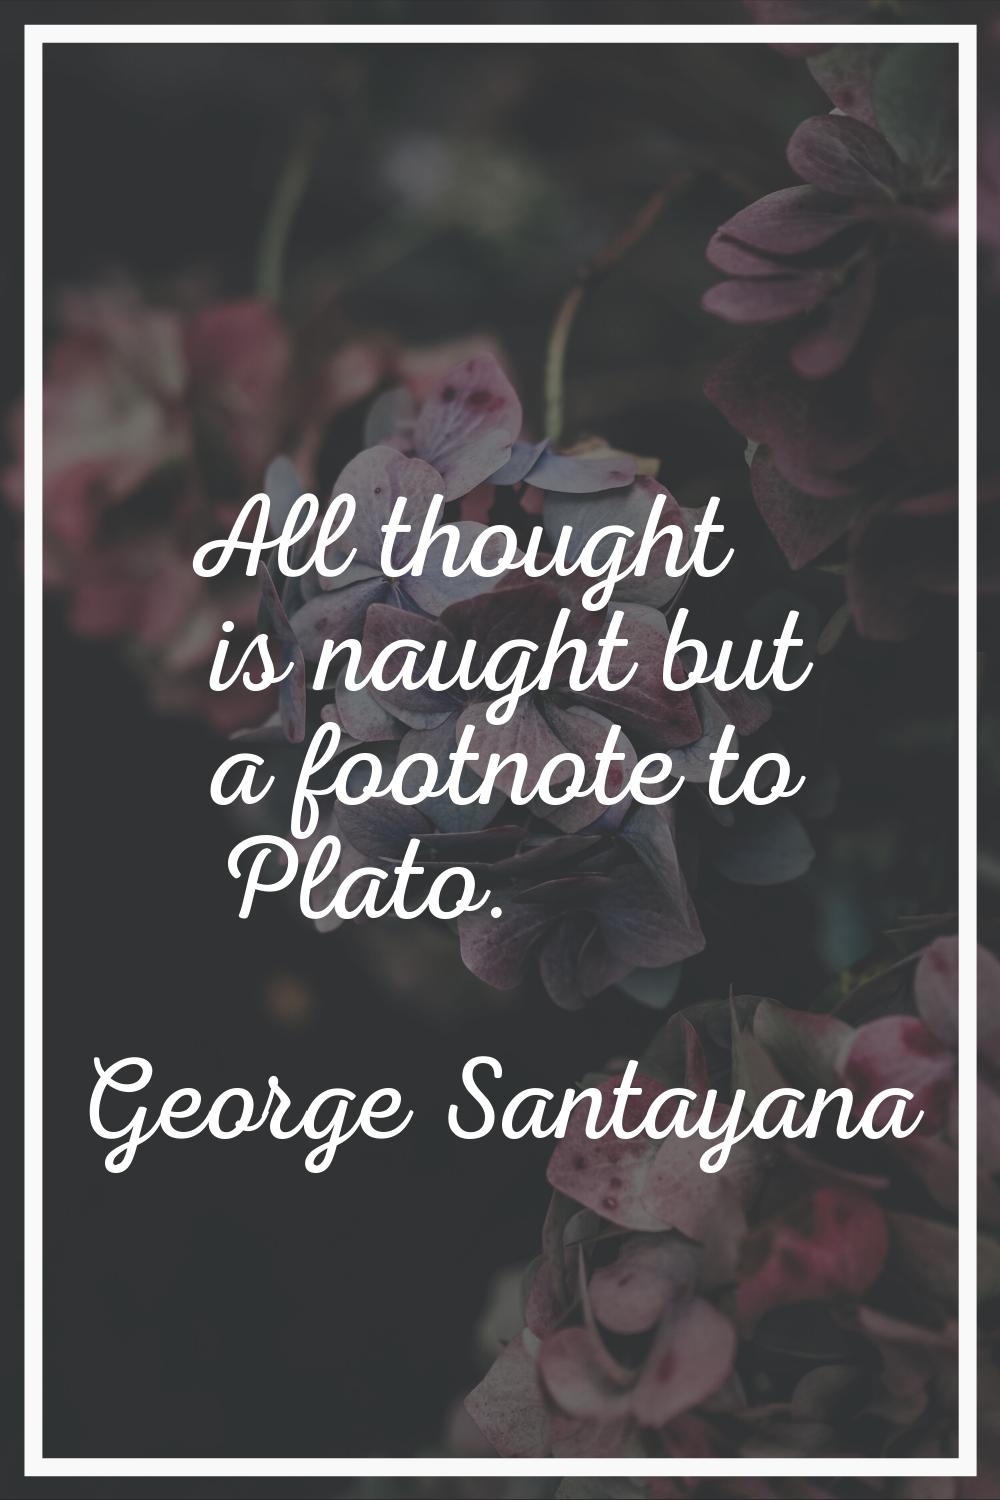 All thought is naught but a footnote to Plato.